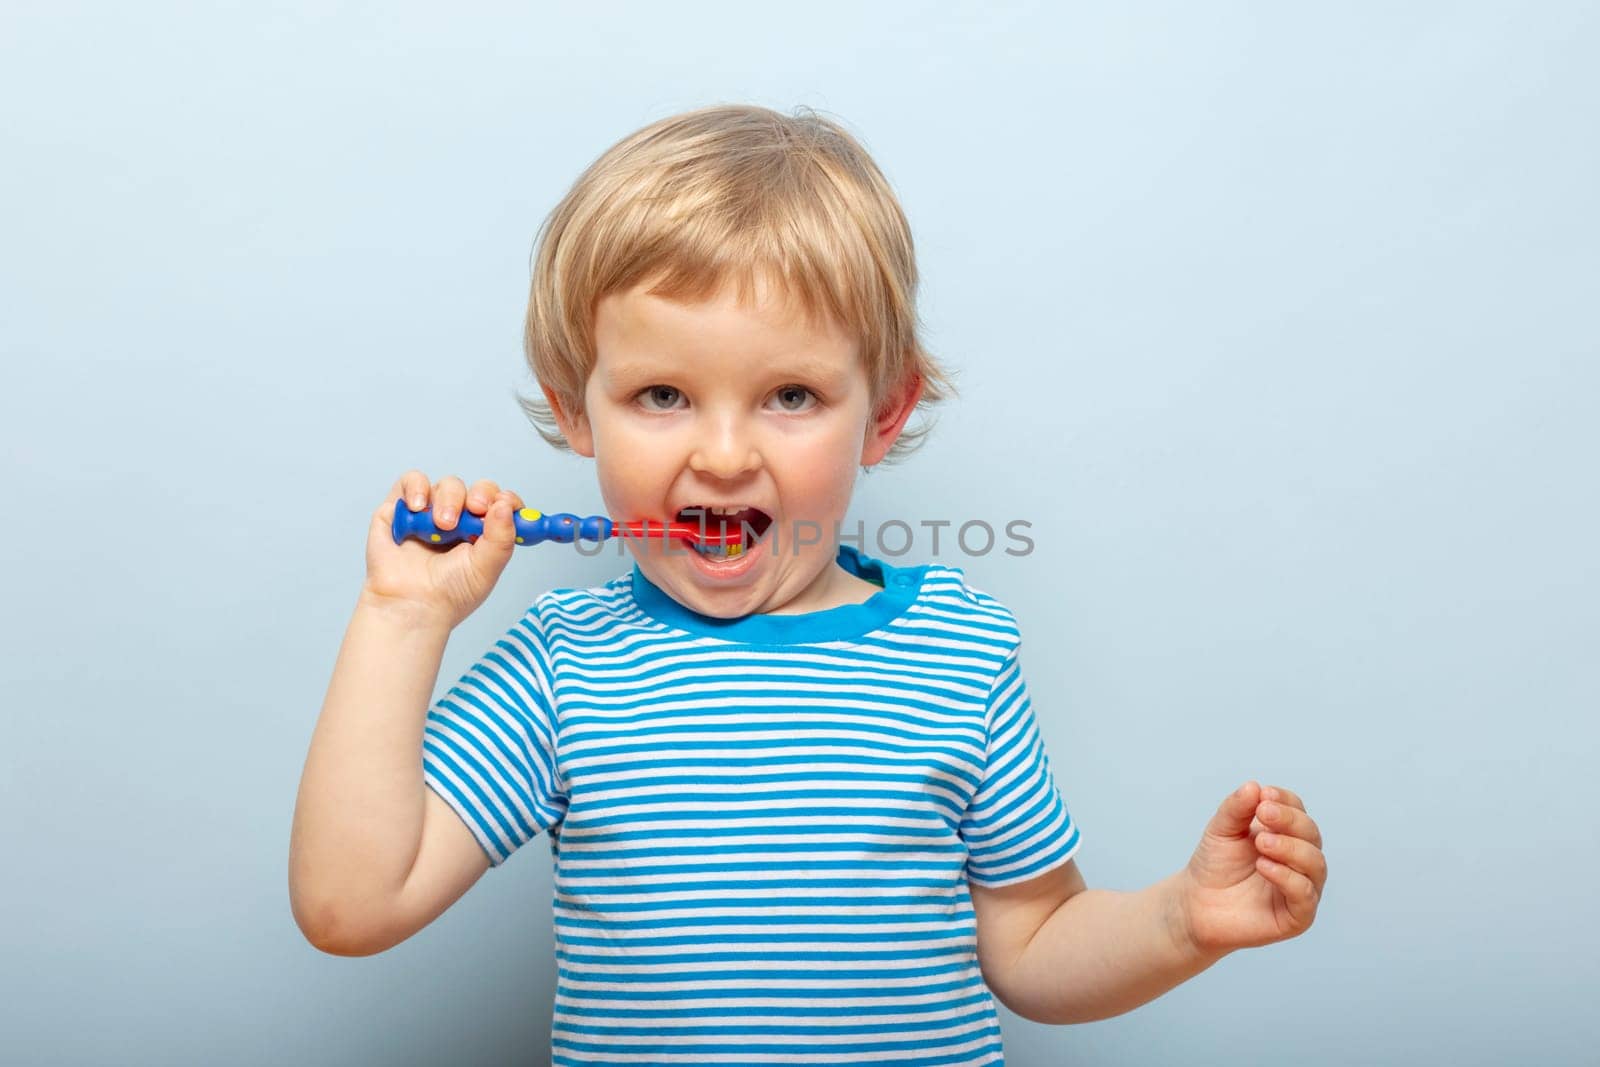 Little blonde boy brushing teeth with toothbrush on blue background by andreyz